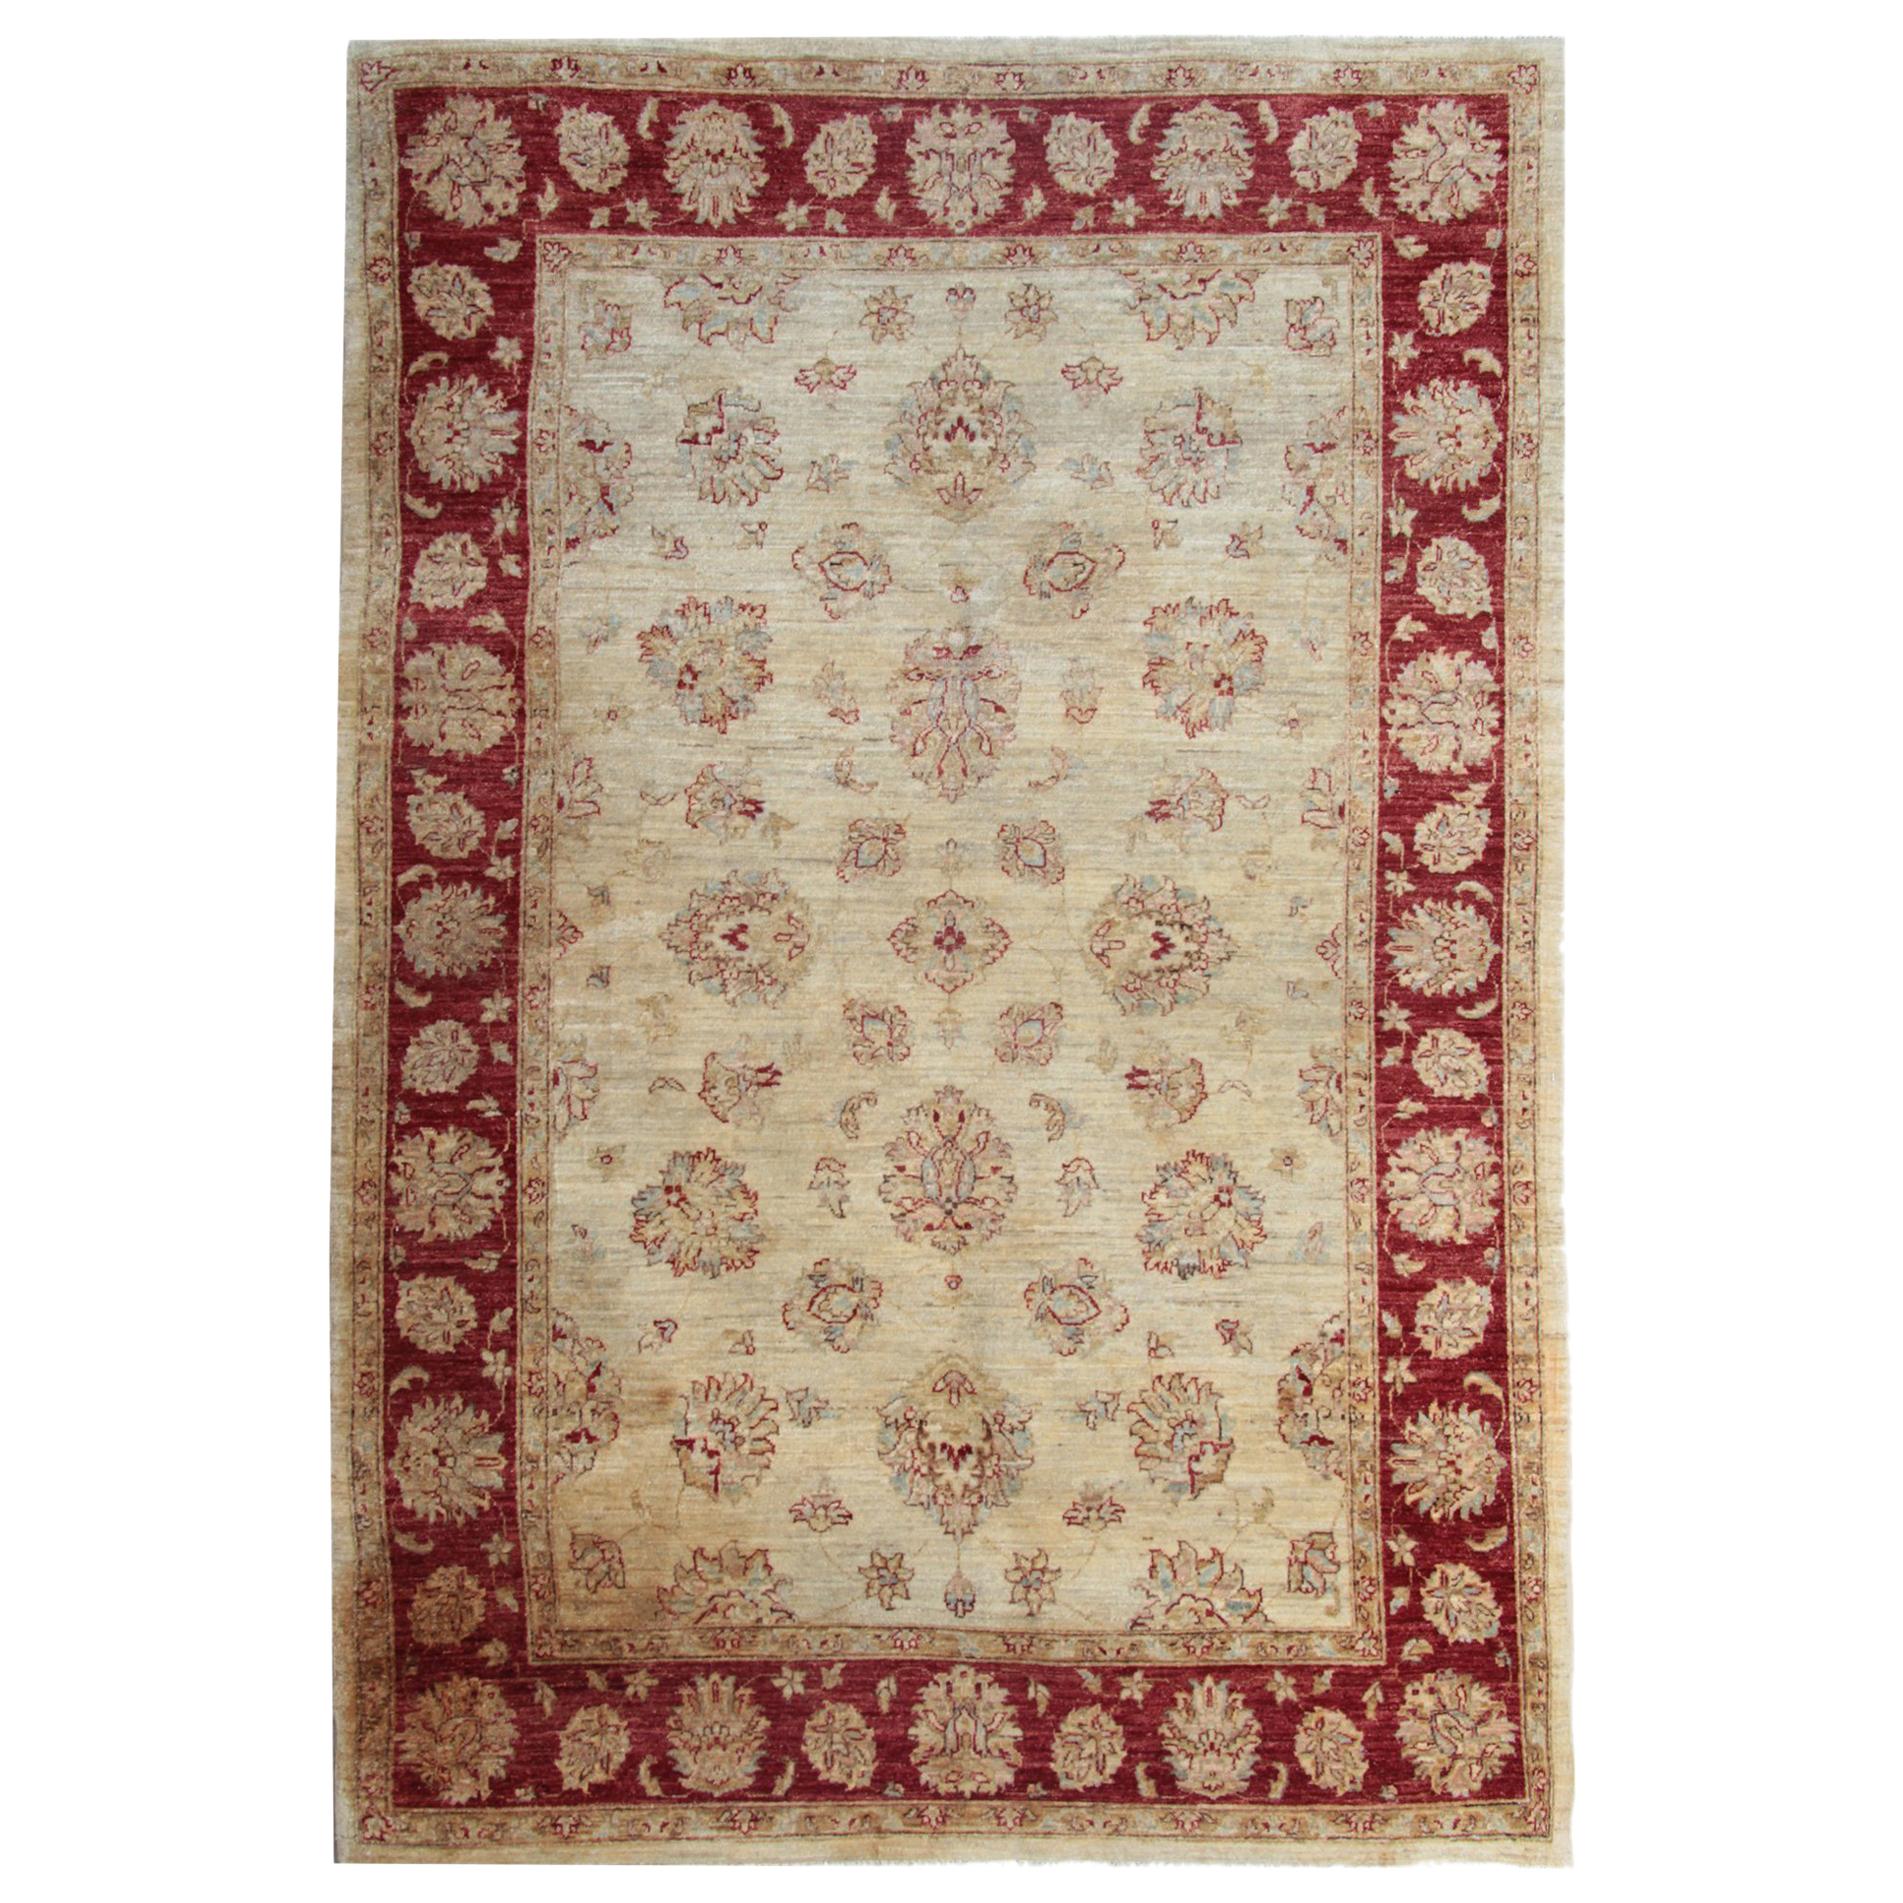 Persian Design Ziegler Mahal Sultanabad Oriental Style Rugs, Afghan Rugs